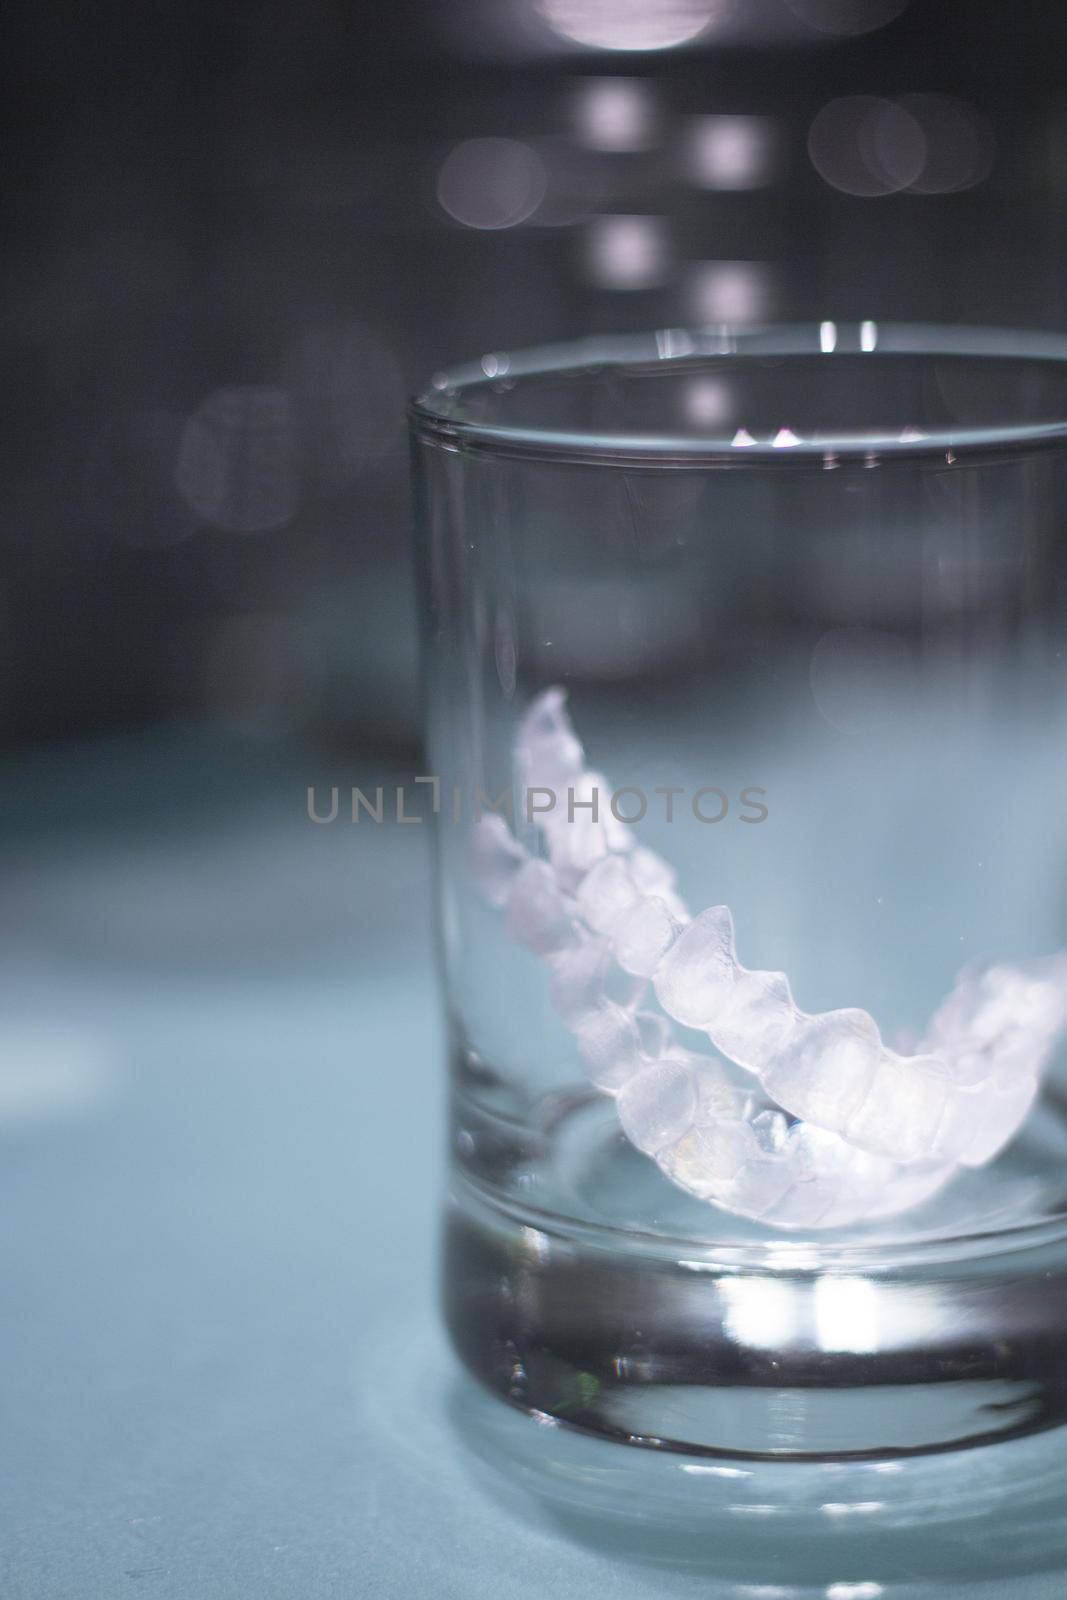 Transparent tooth aligner inside a crystal glass. No people